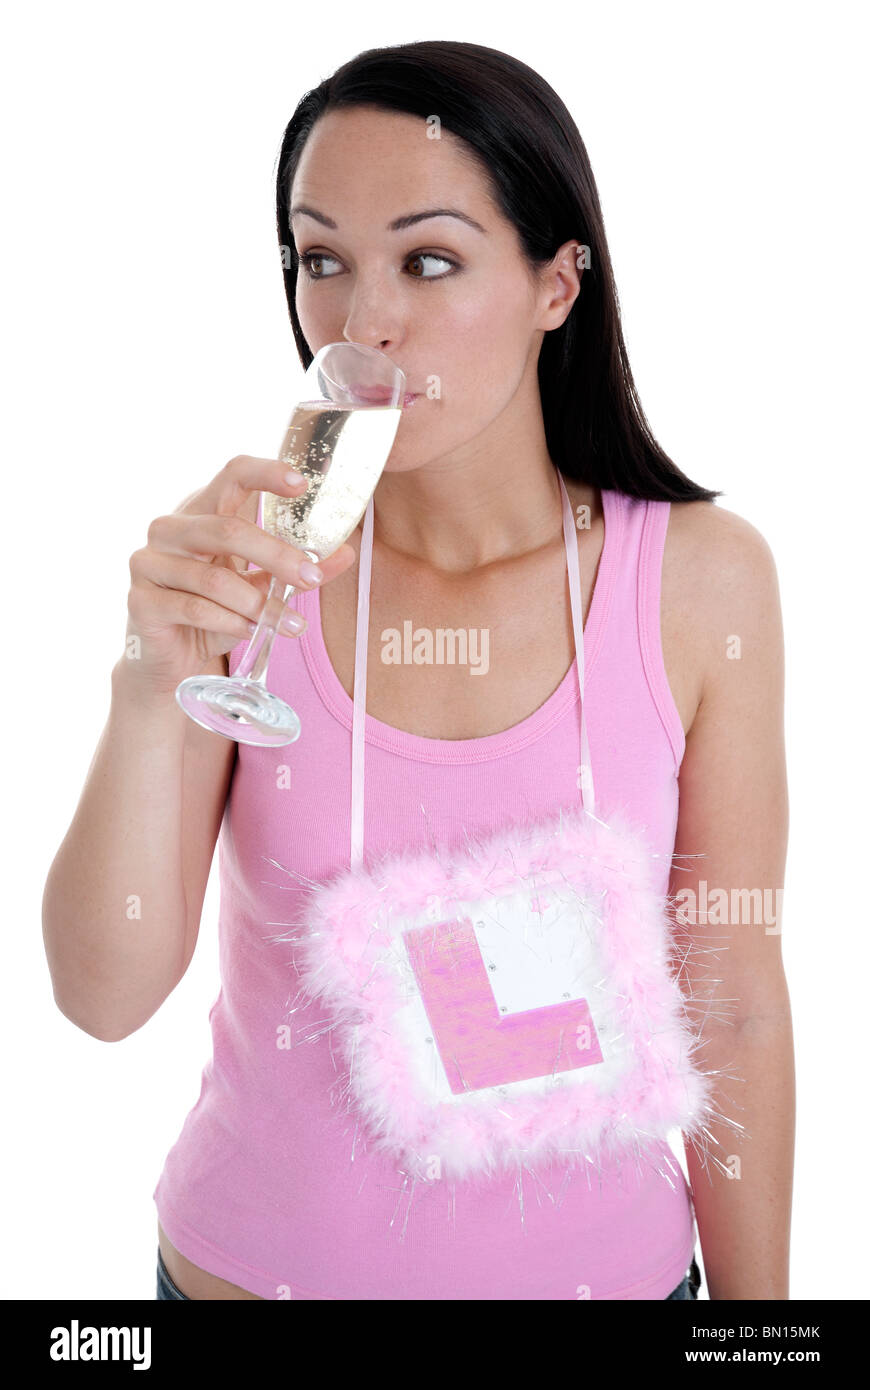 Bride to be getting drunk Stock Photo